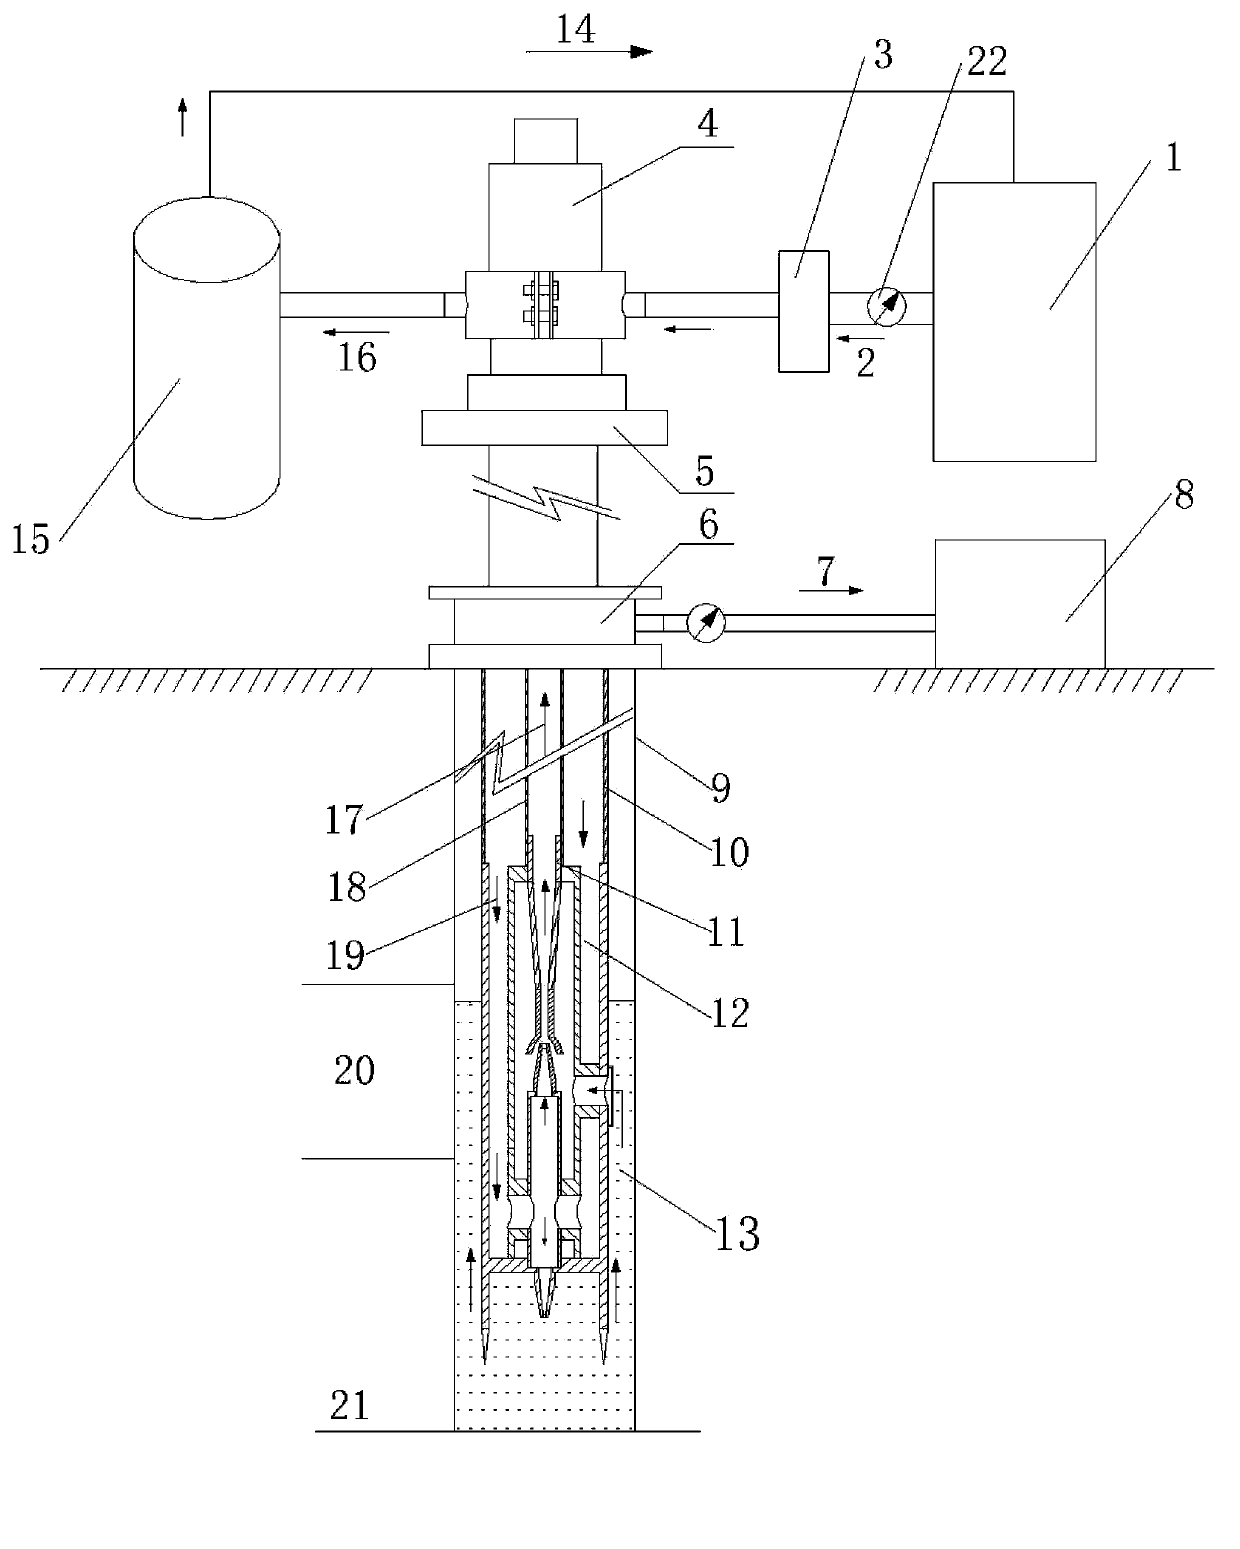 Concentric-tube pulverized coal discharging system and method for coal-bed gas well